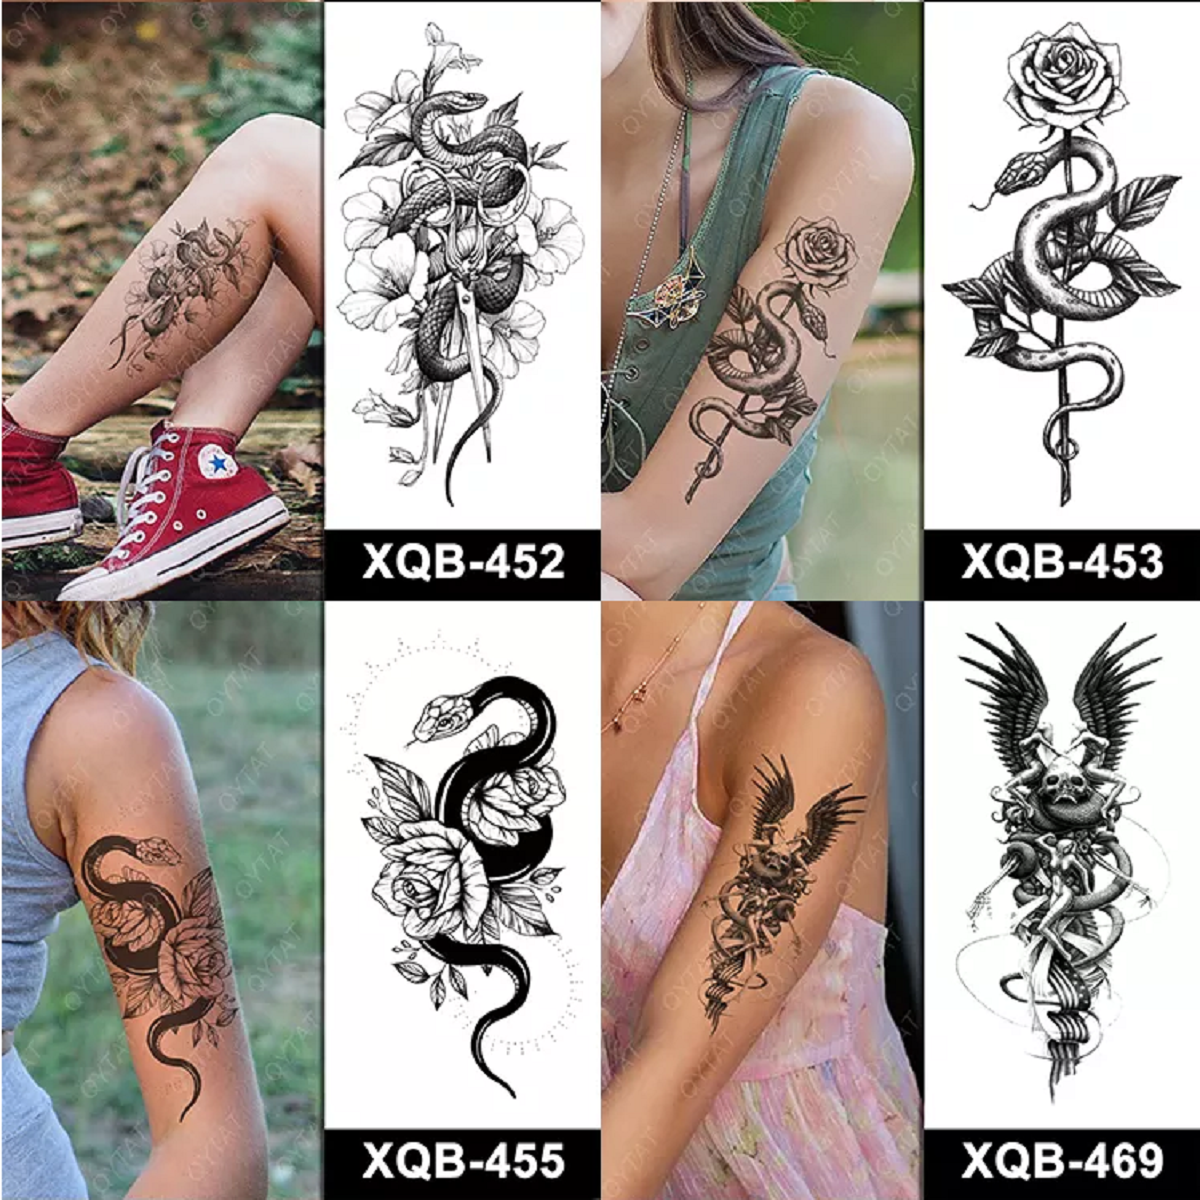 10 Sheets Black Snake Temporary Tattoos with Flower Zombie Sword For Men Women Neck Arm Body Art Waterproof Fake Tattoo Stickers Flash Decals